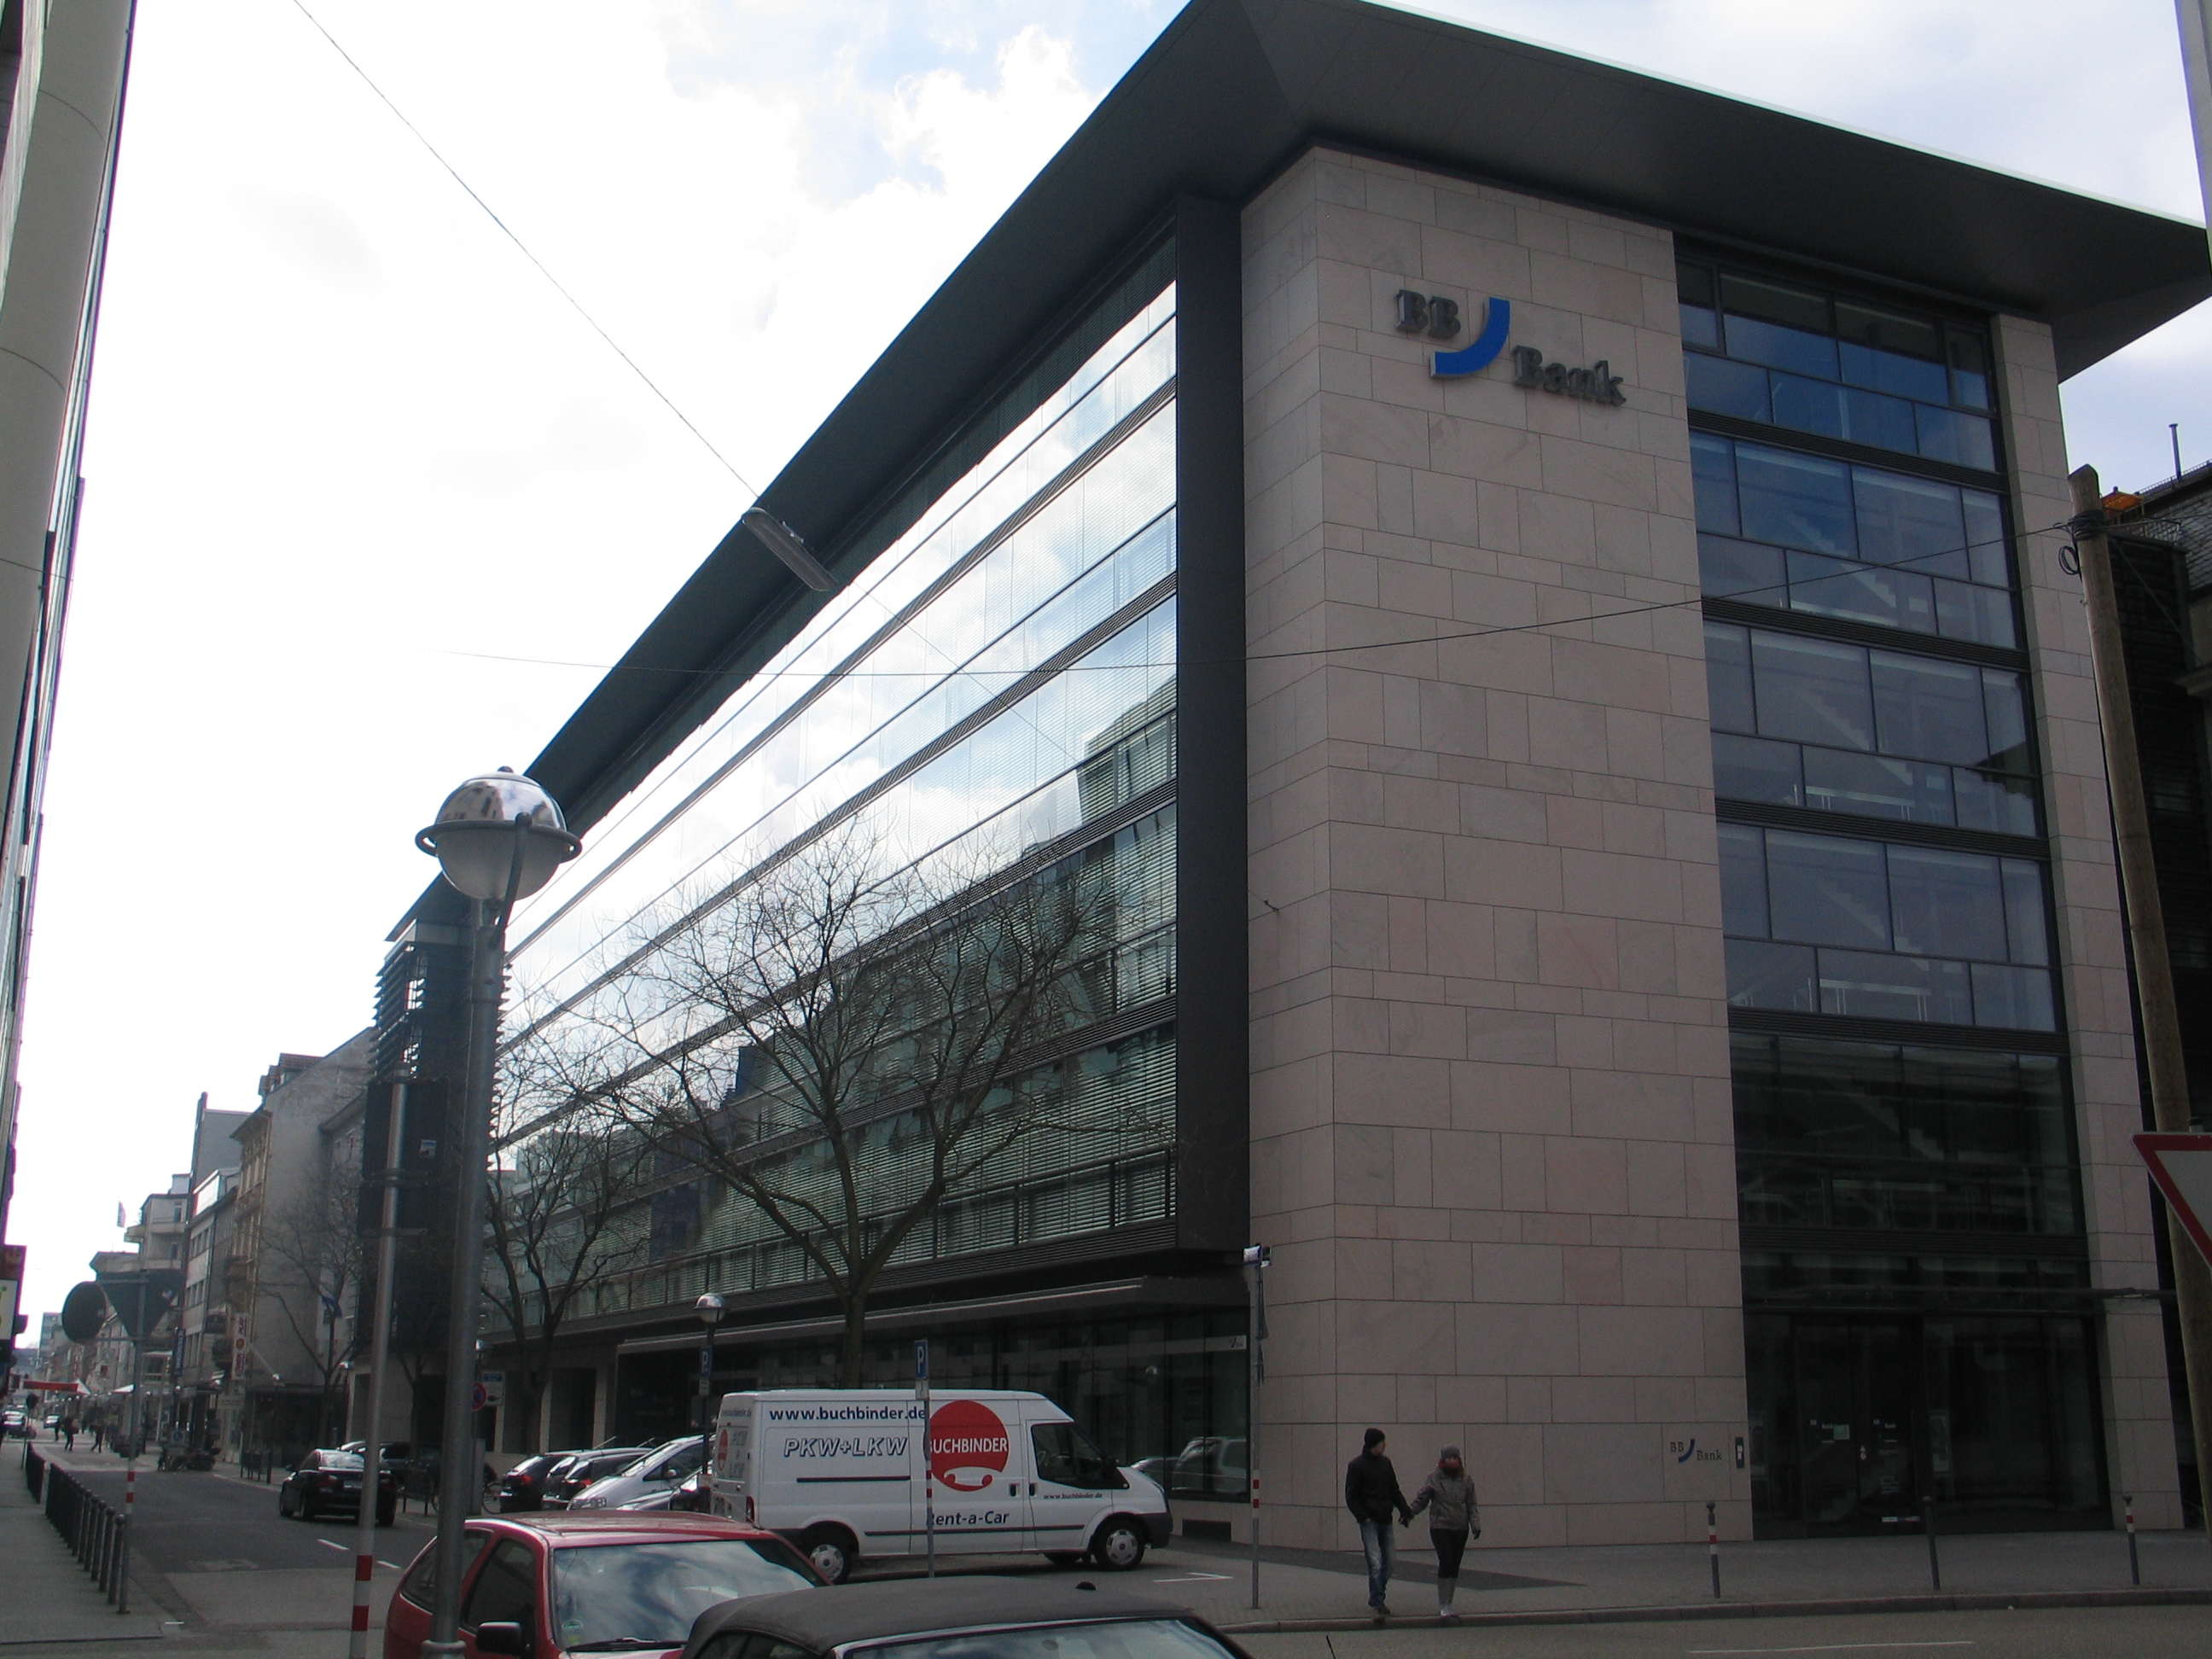 Seat of the BBBank in Karlsruhe